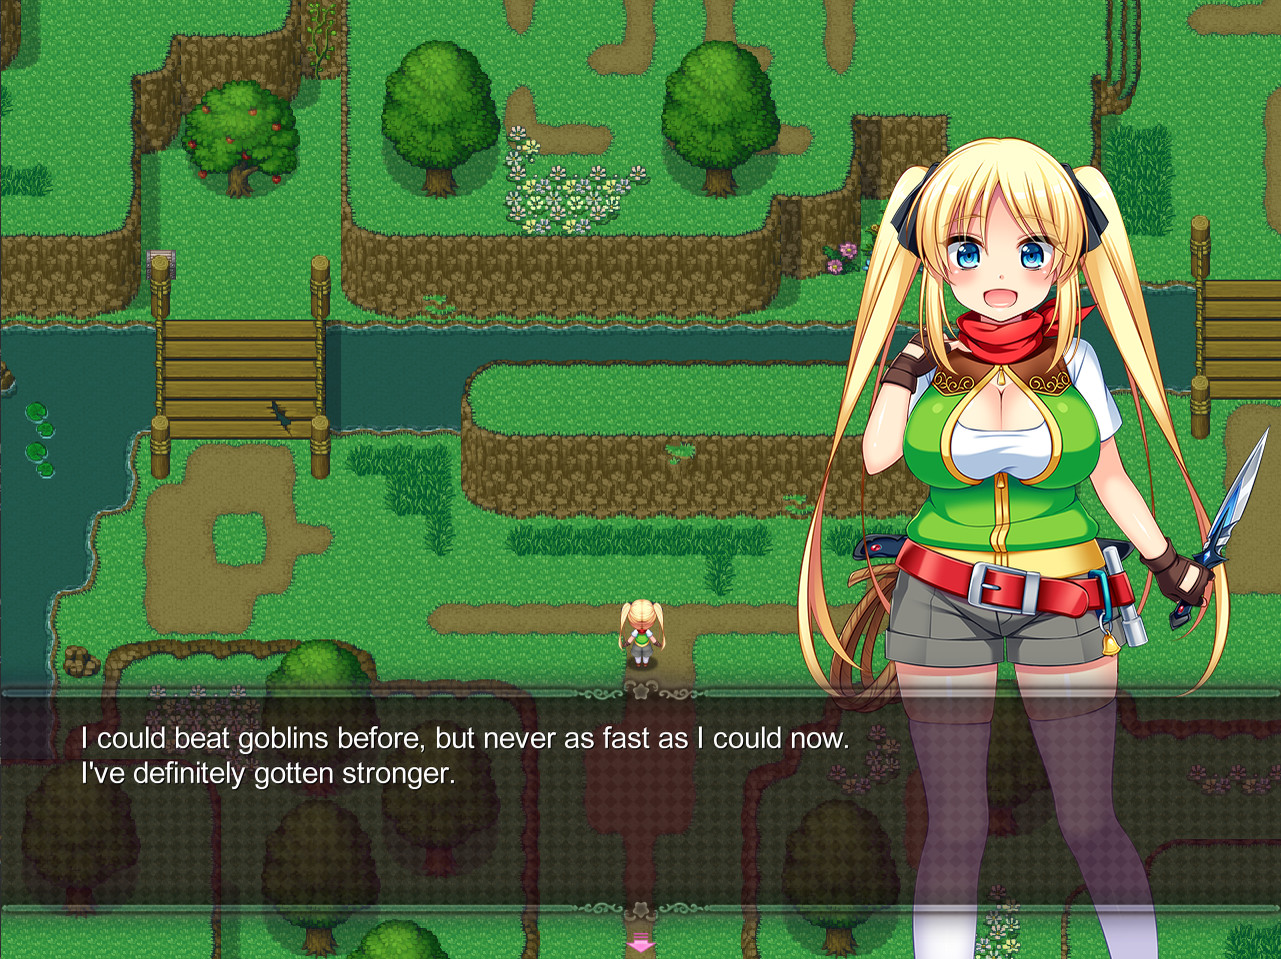 Treasure Hunter Claire and 30+ similar games - Find your next favorite game on SteamPeek!